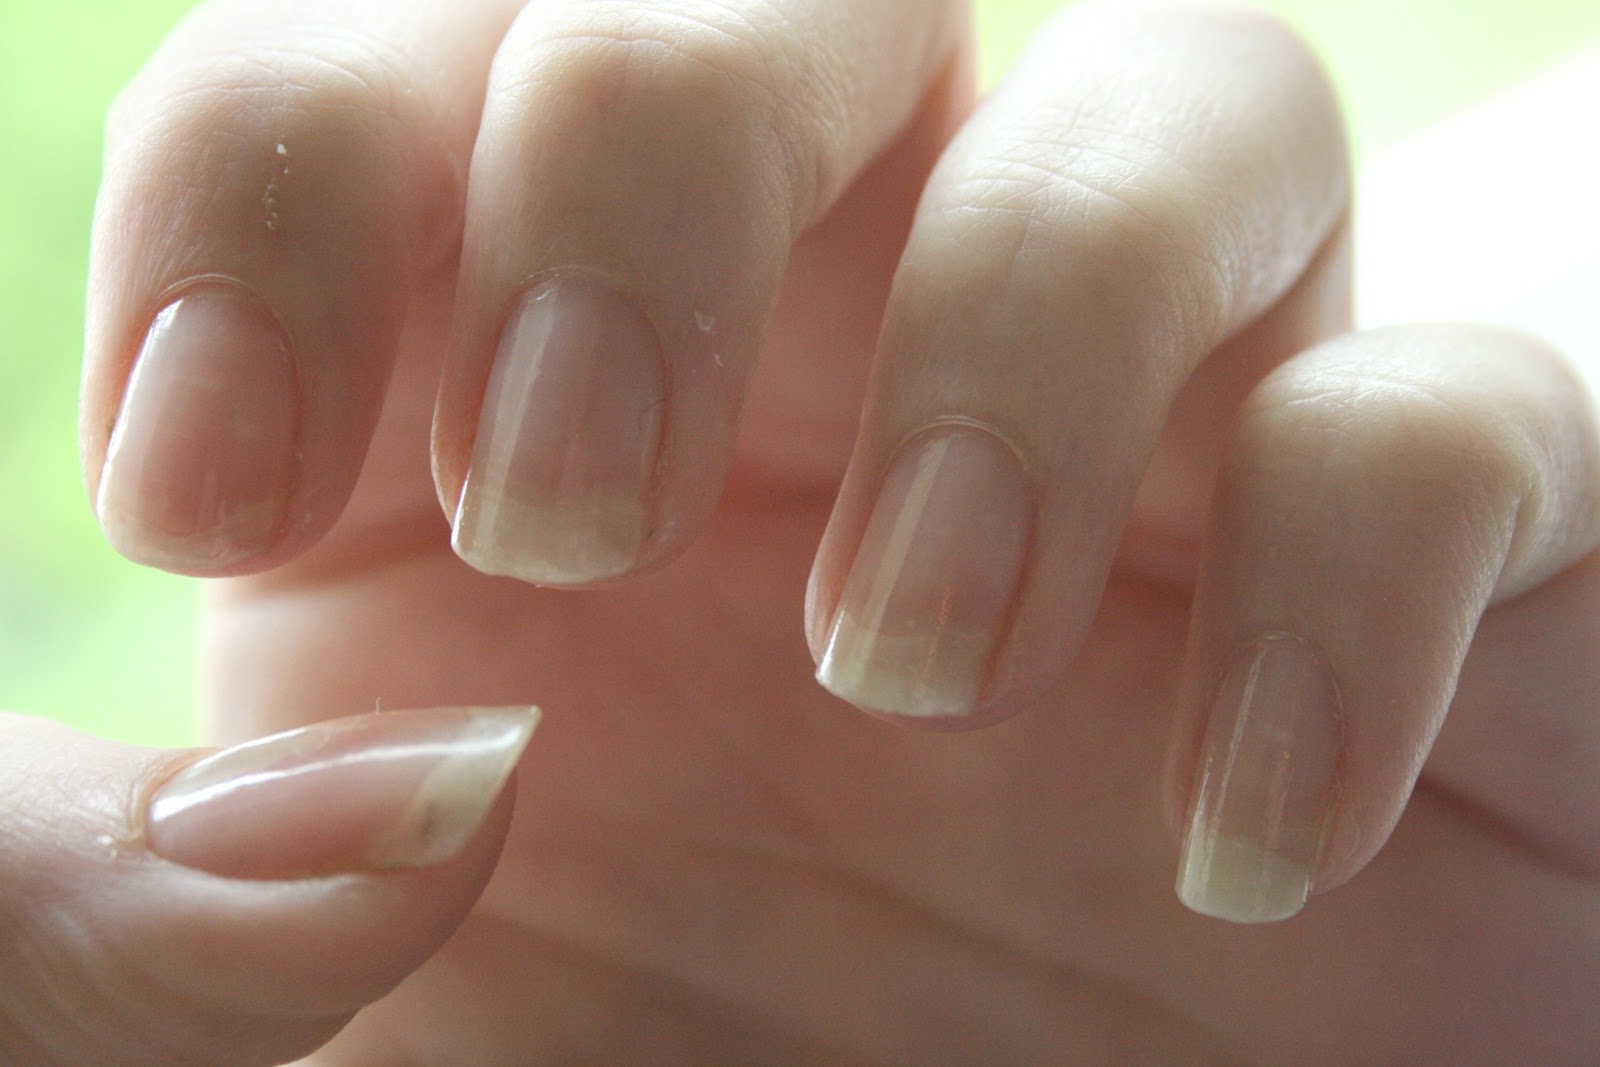 It also gives a great natural glossy finish to the nails and doesn't take